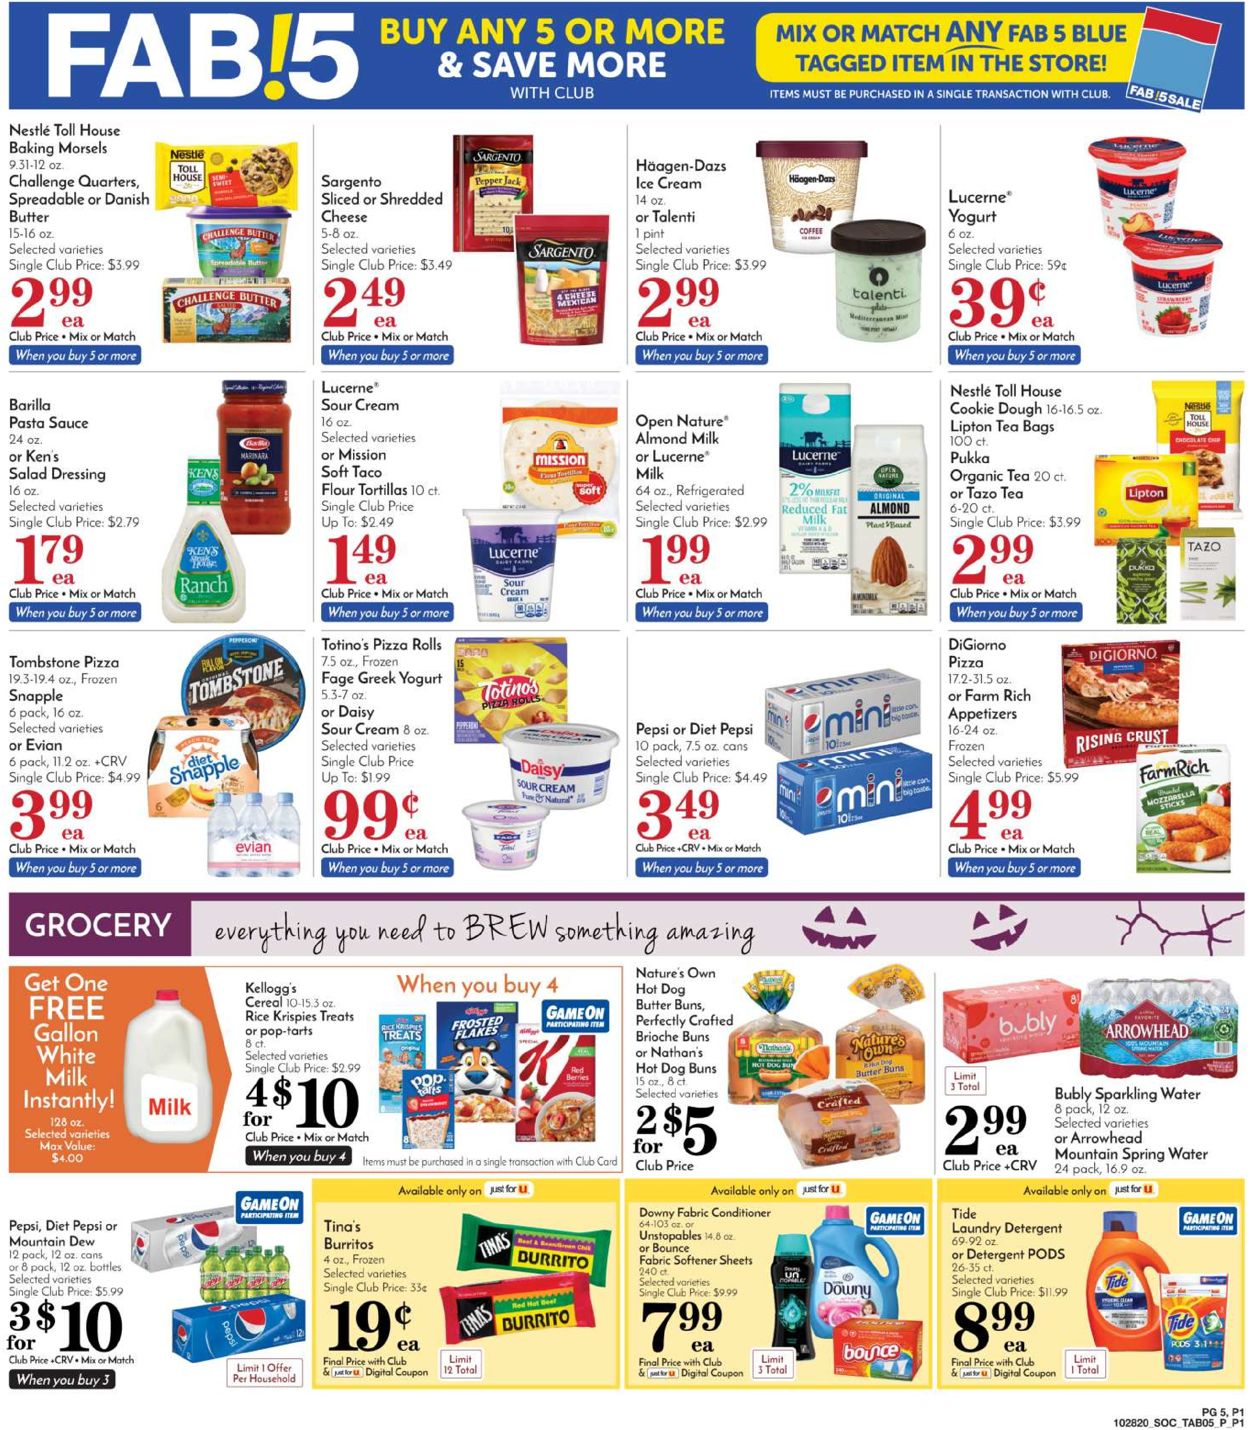 Pavilions Ad from 10/28/2020